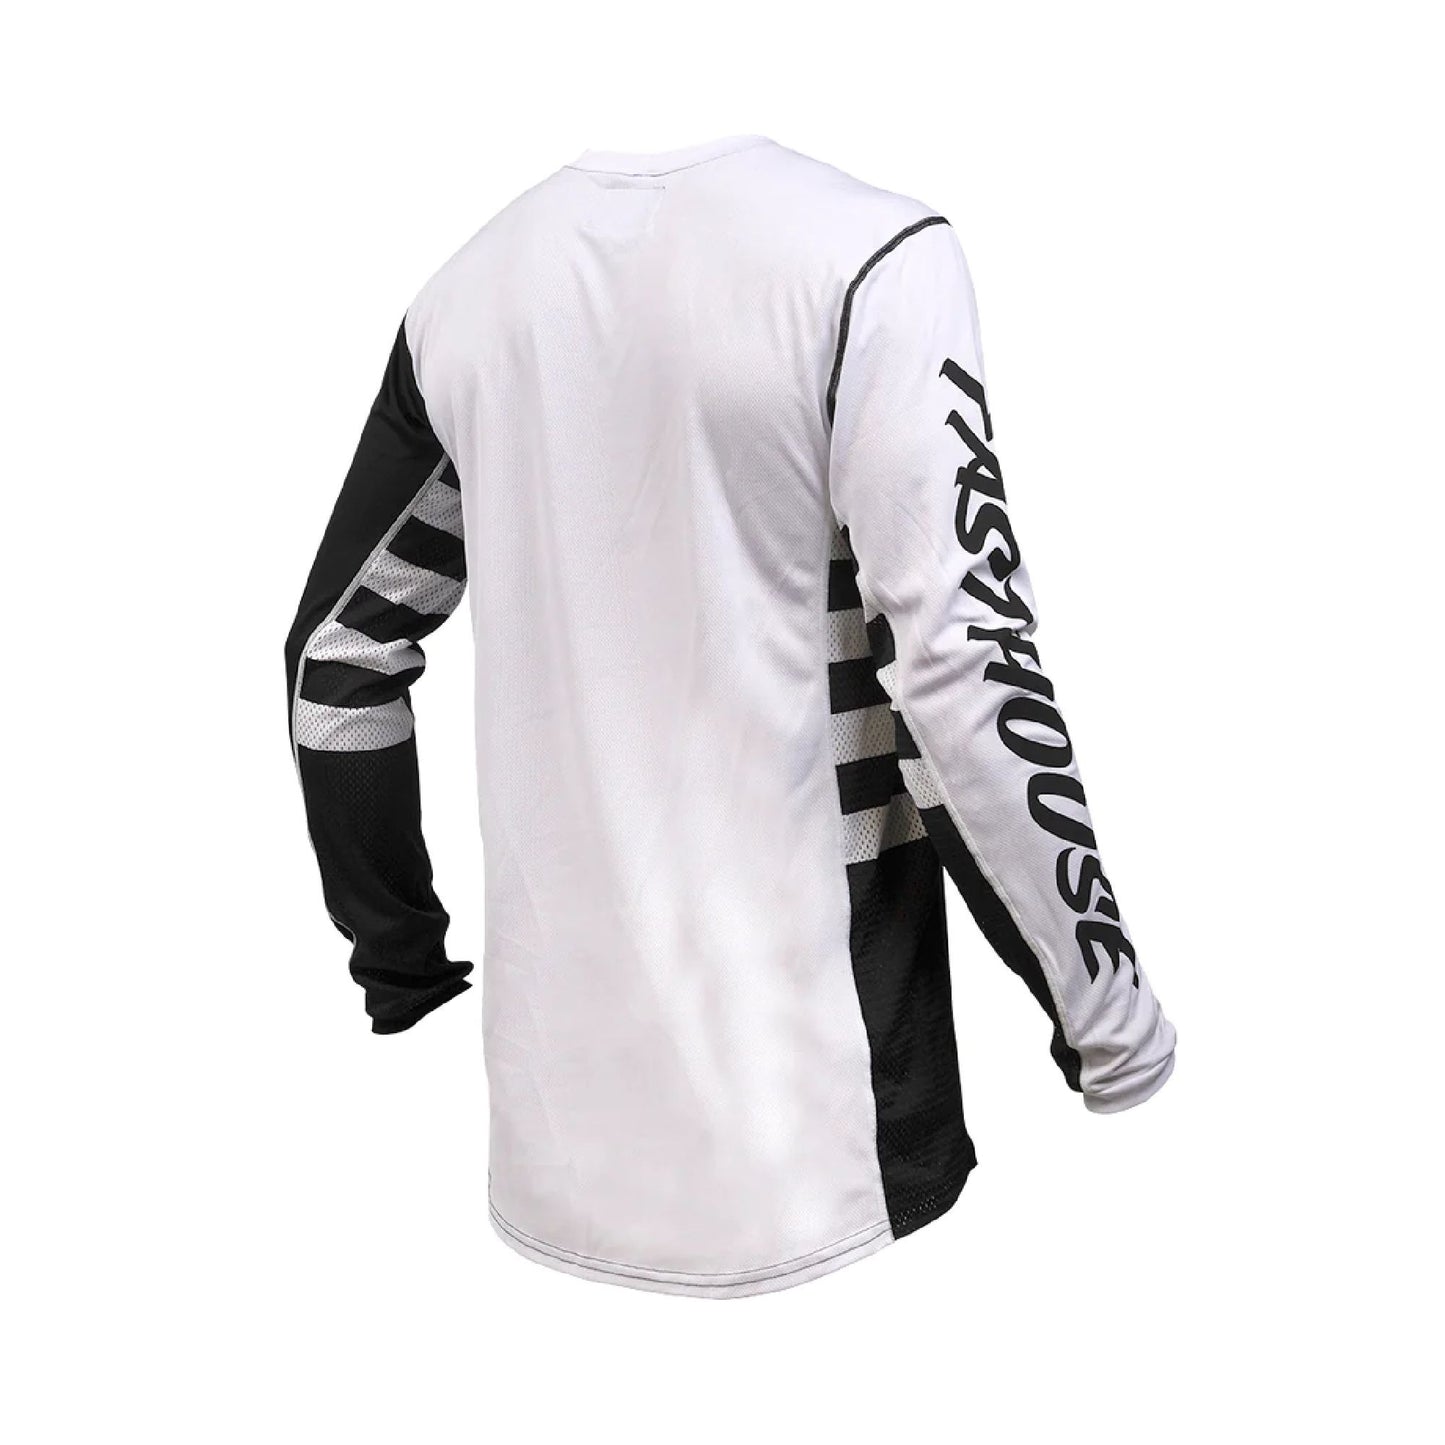 Fasthouse Youth USA Grindhouse Factor Jersey Black/White Bike Jerseys